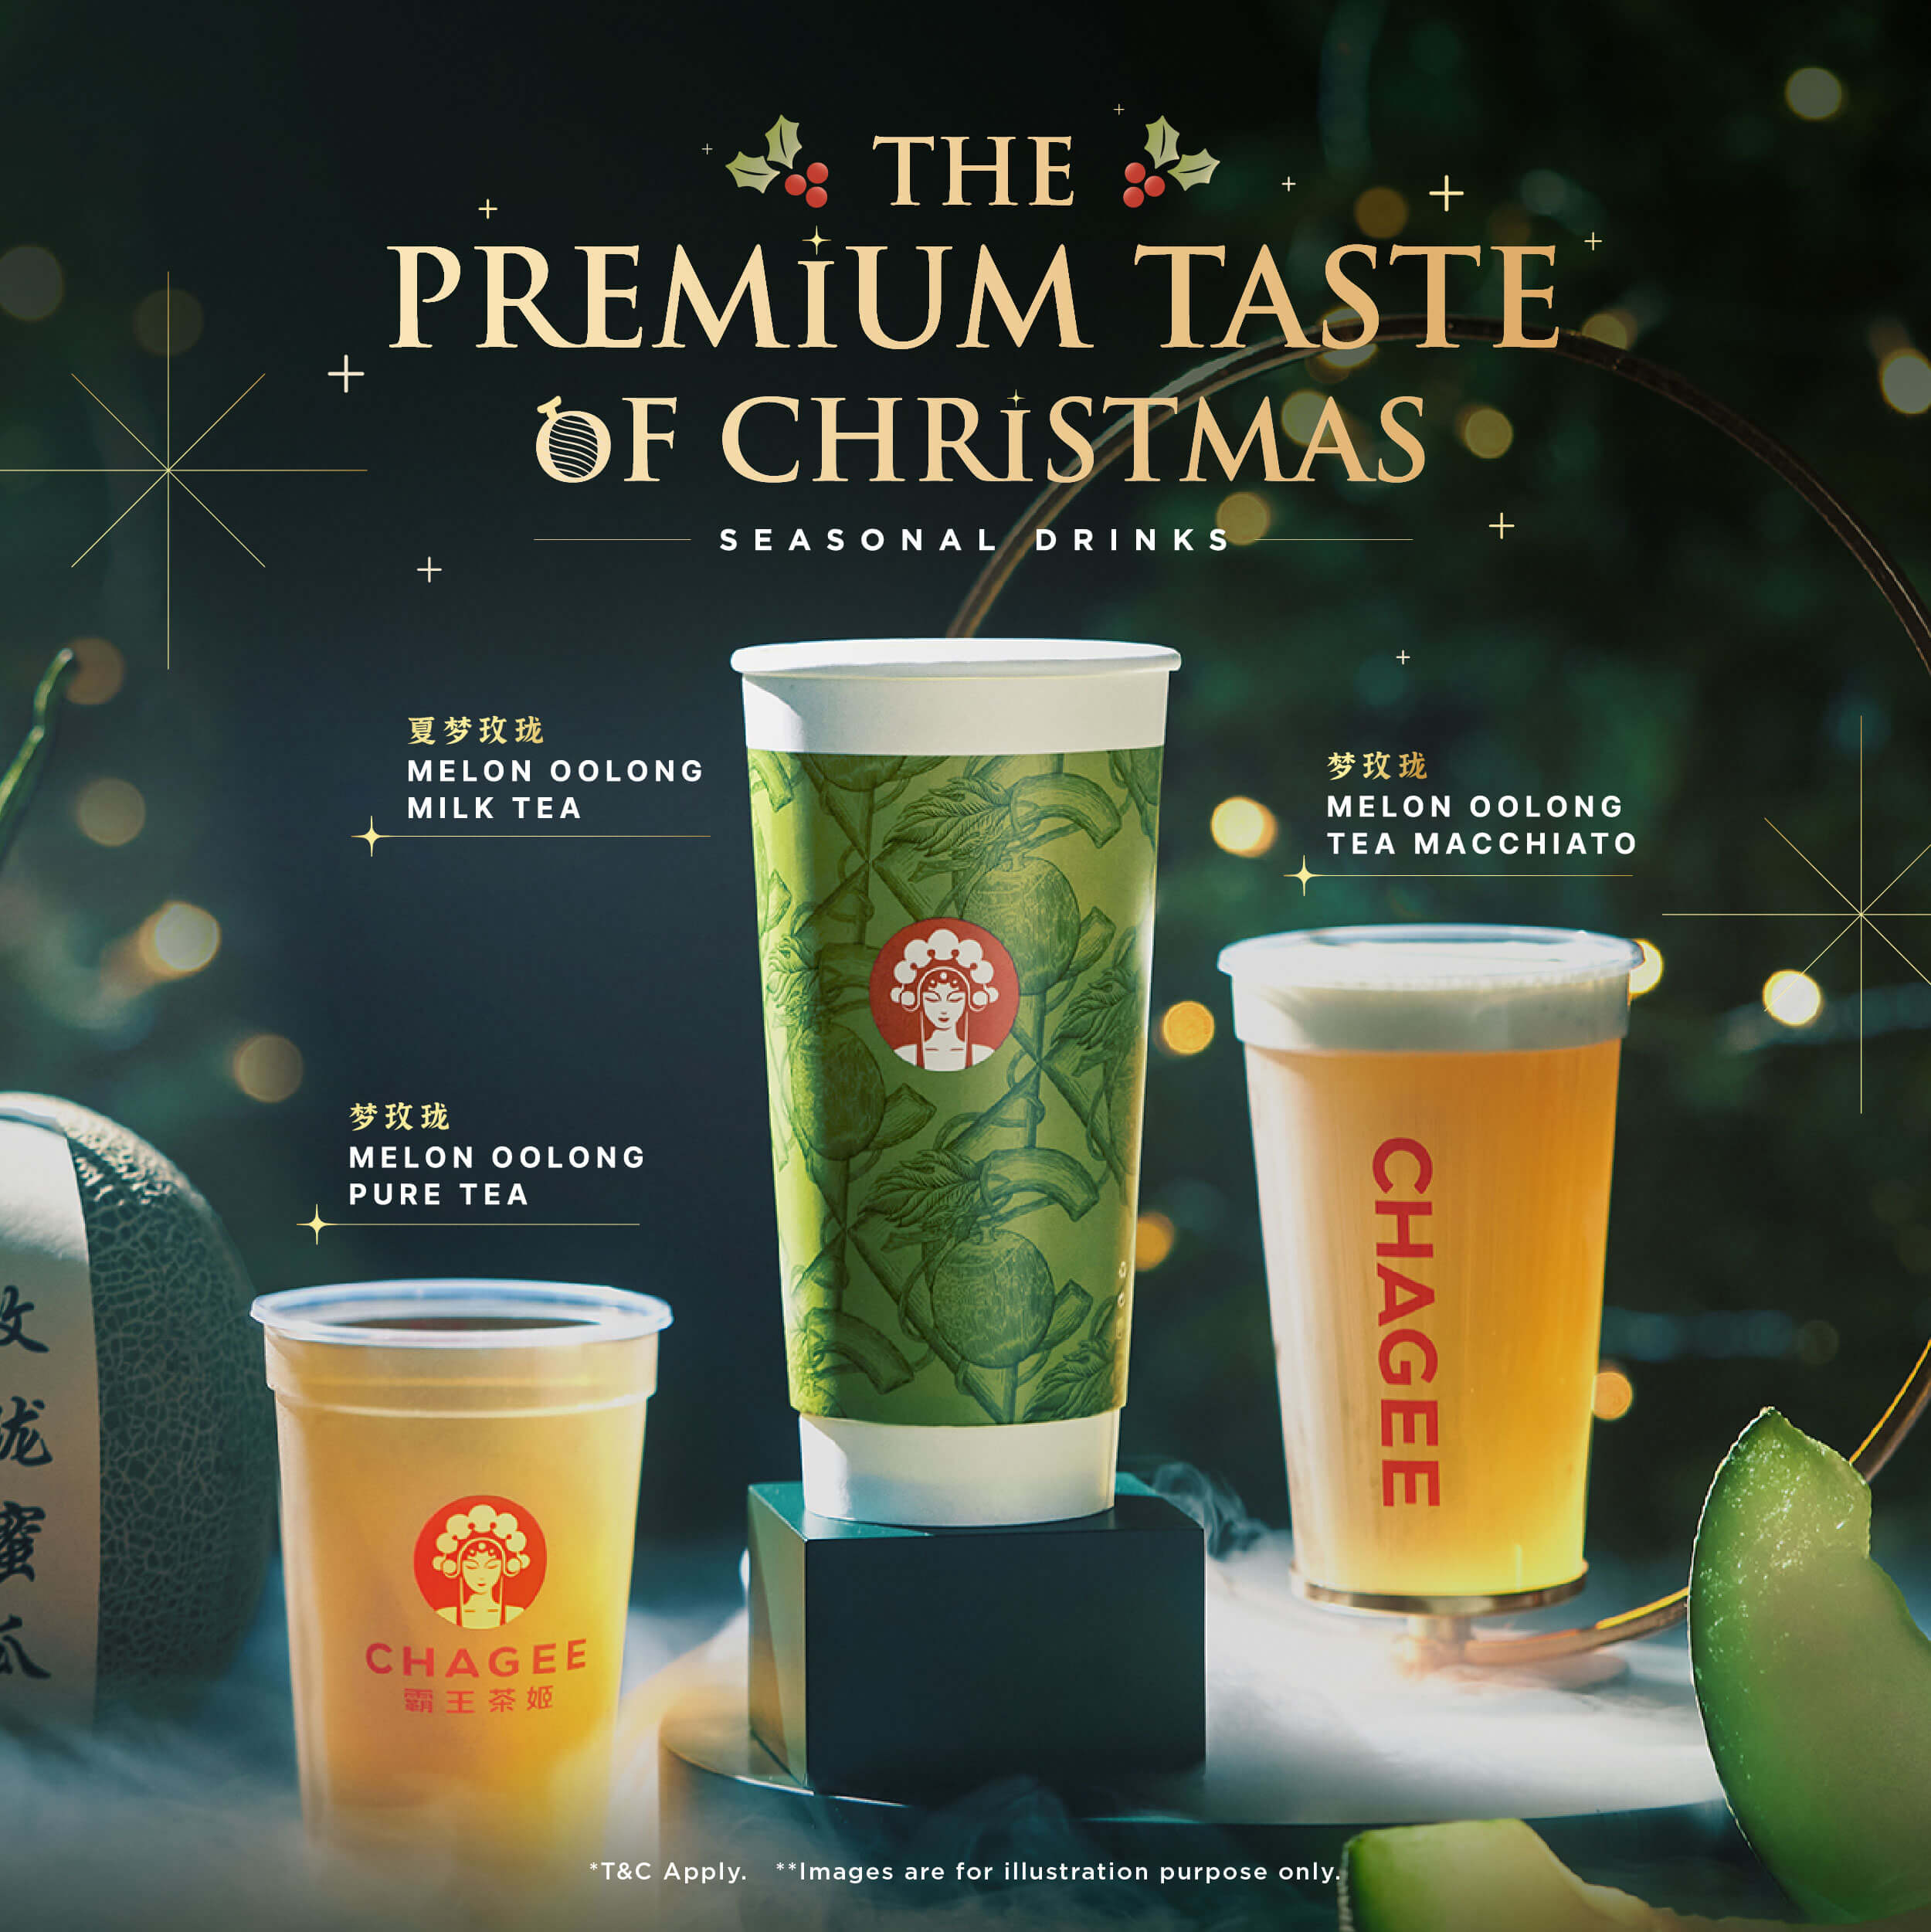 CHAGEE offers Premium Taste of Christmas with Seasonal Meilong Melon Oolong Series